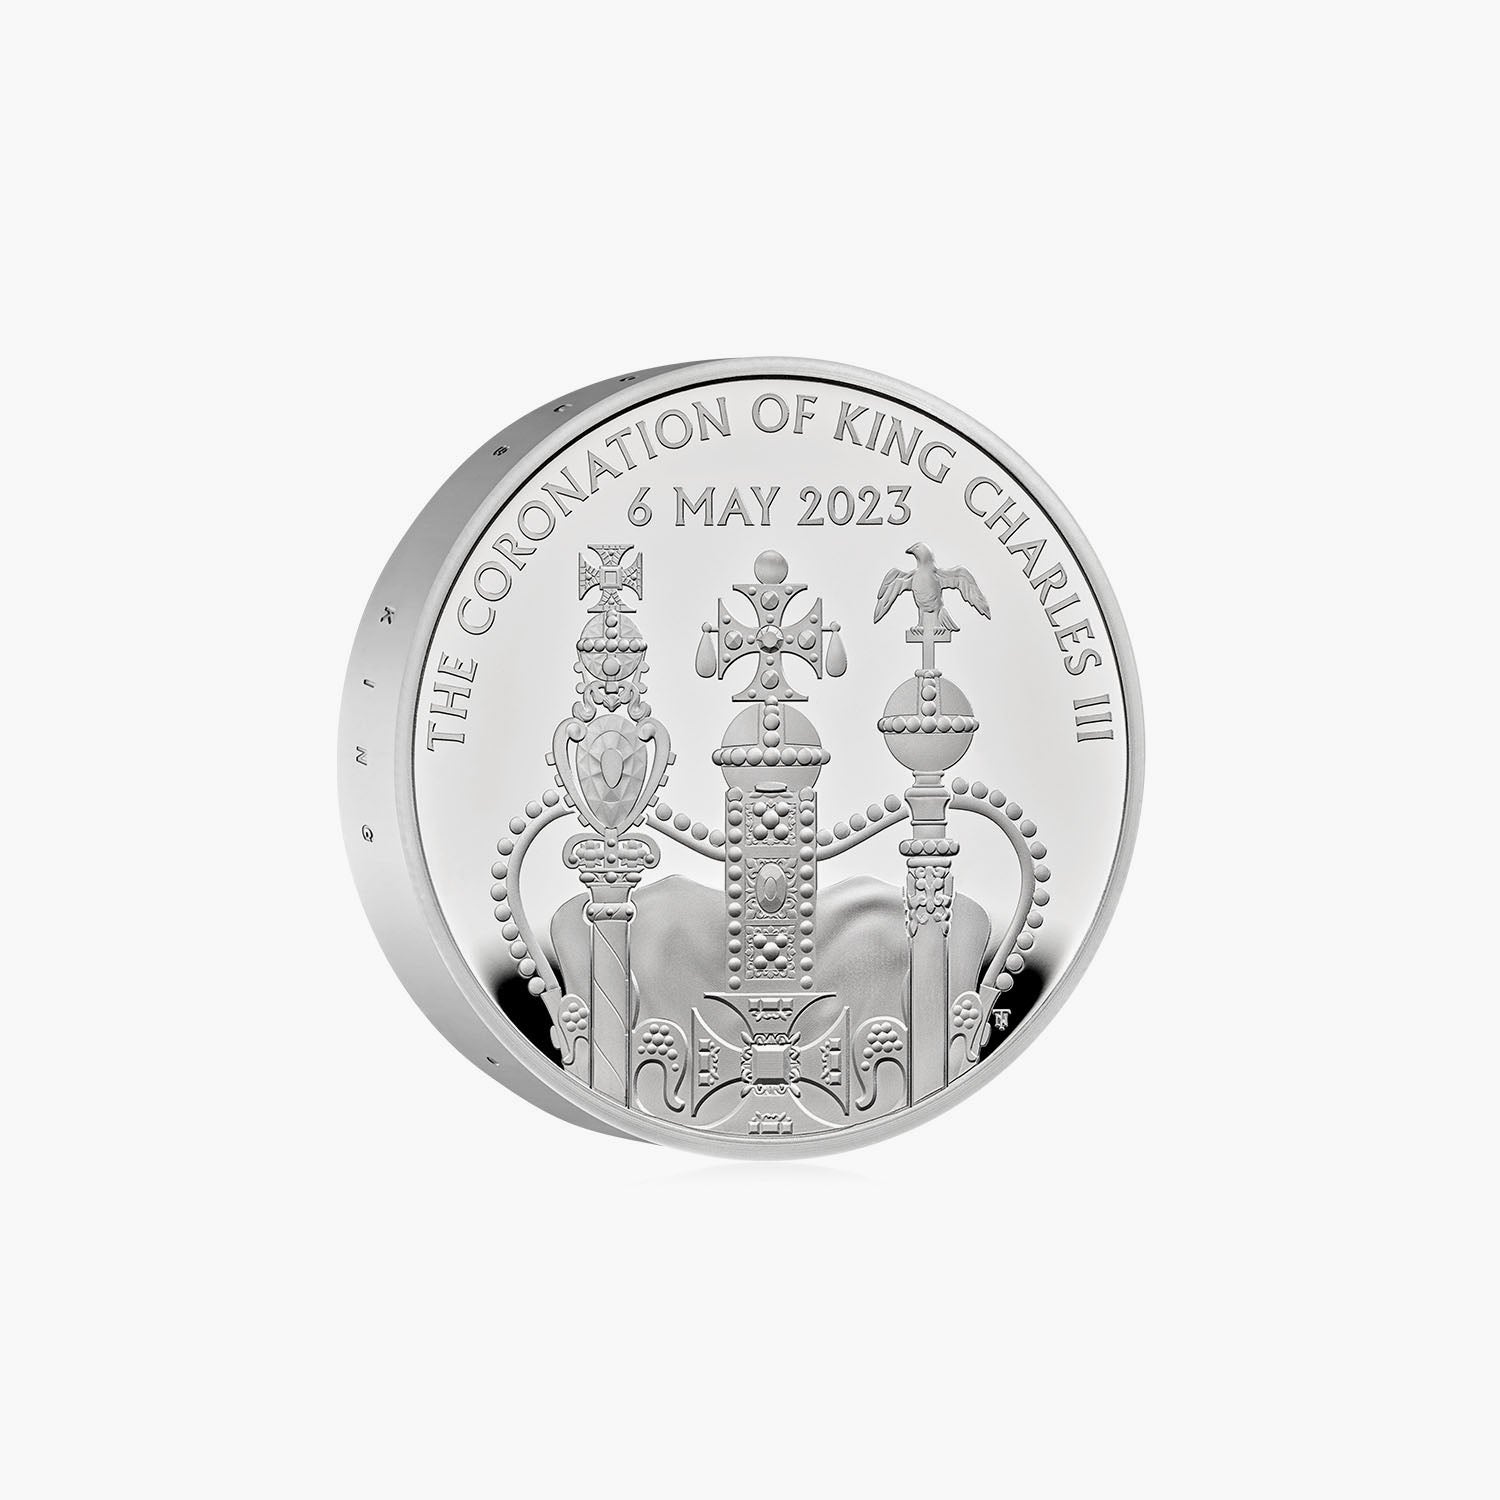 The Coronation of His Majesty King Charles £5.00 Silver Piedfort